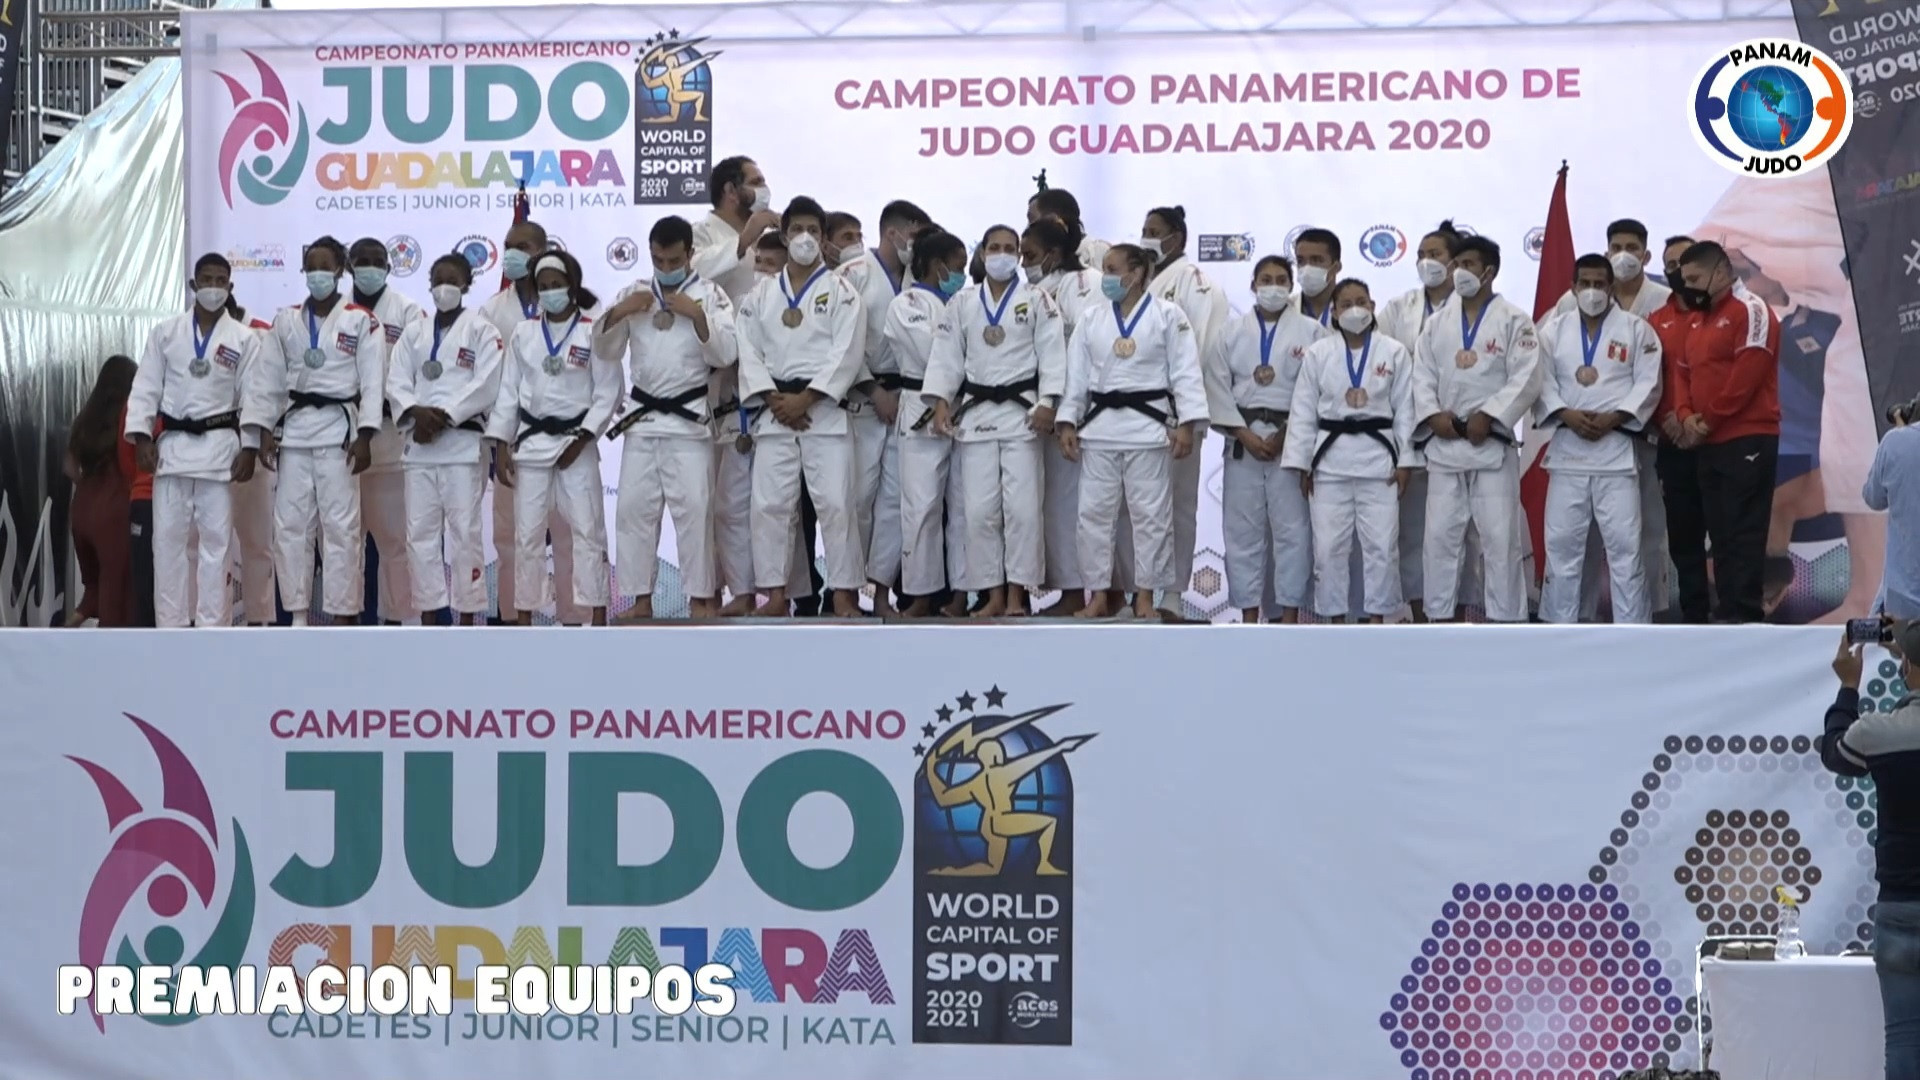 Brazil defeated Cuba 4-3 to win the mixed team title ©Pan American Championships